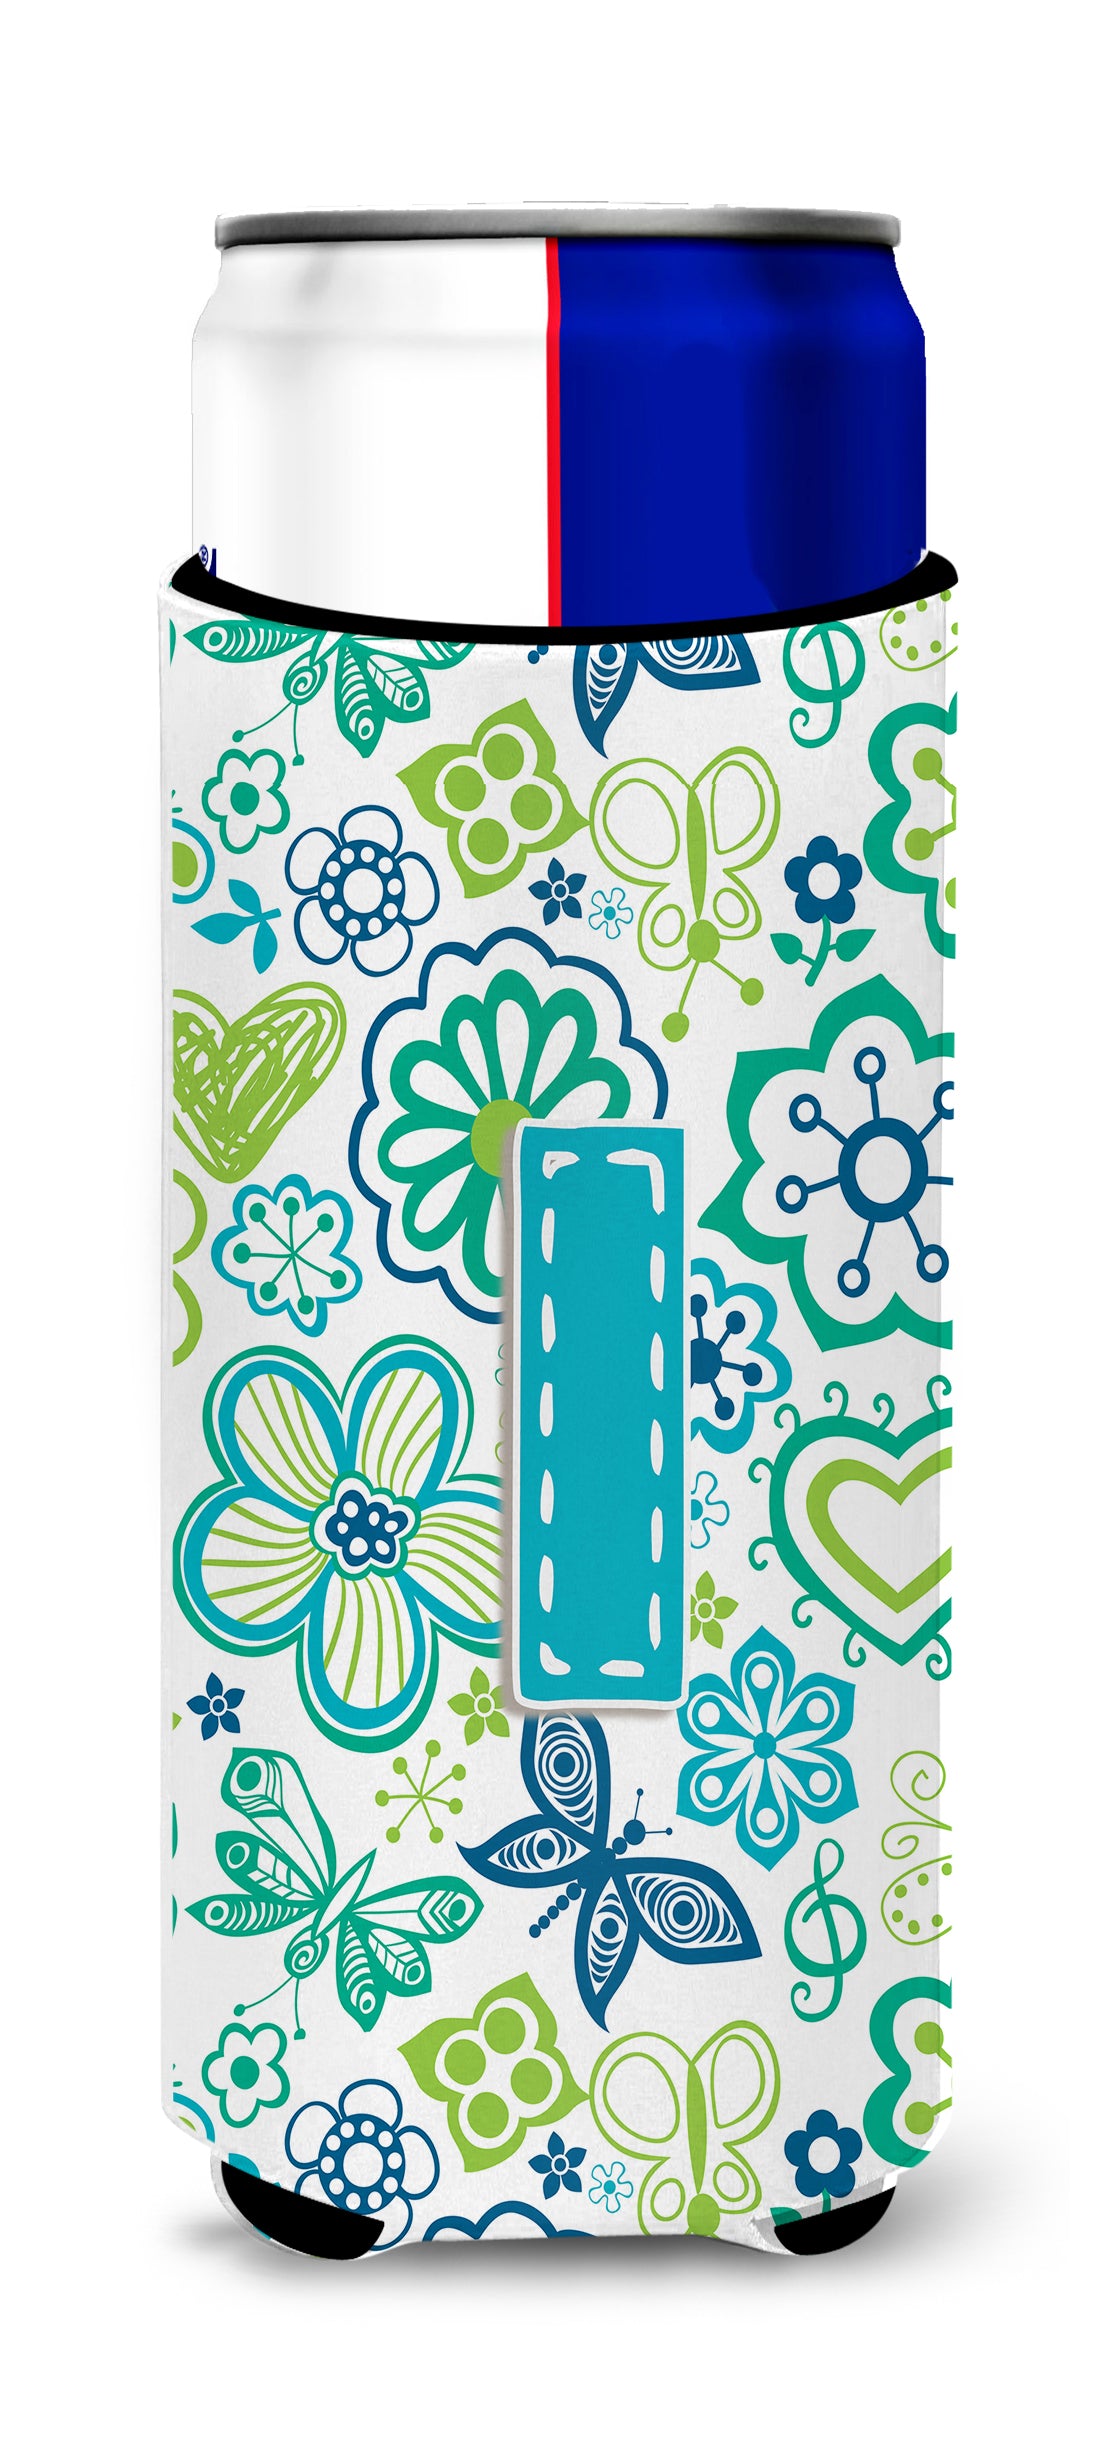 Letter I Flowers and Butterflies Teal Blue Ultra Beverage Insulators for slim cans CJ2006-IMUK.